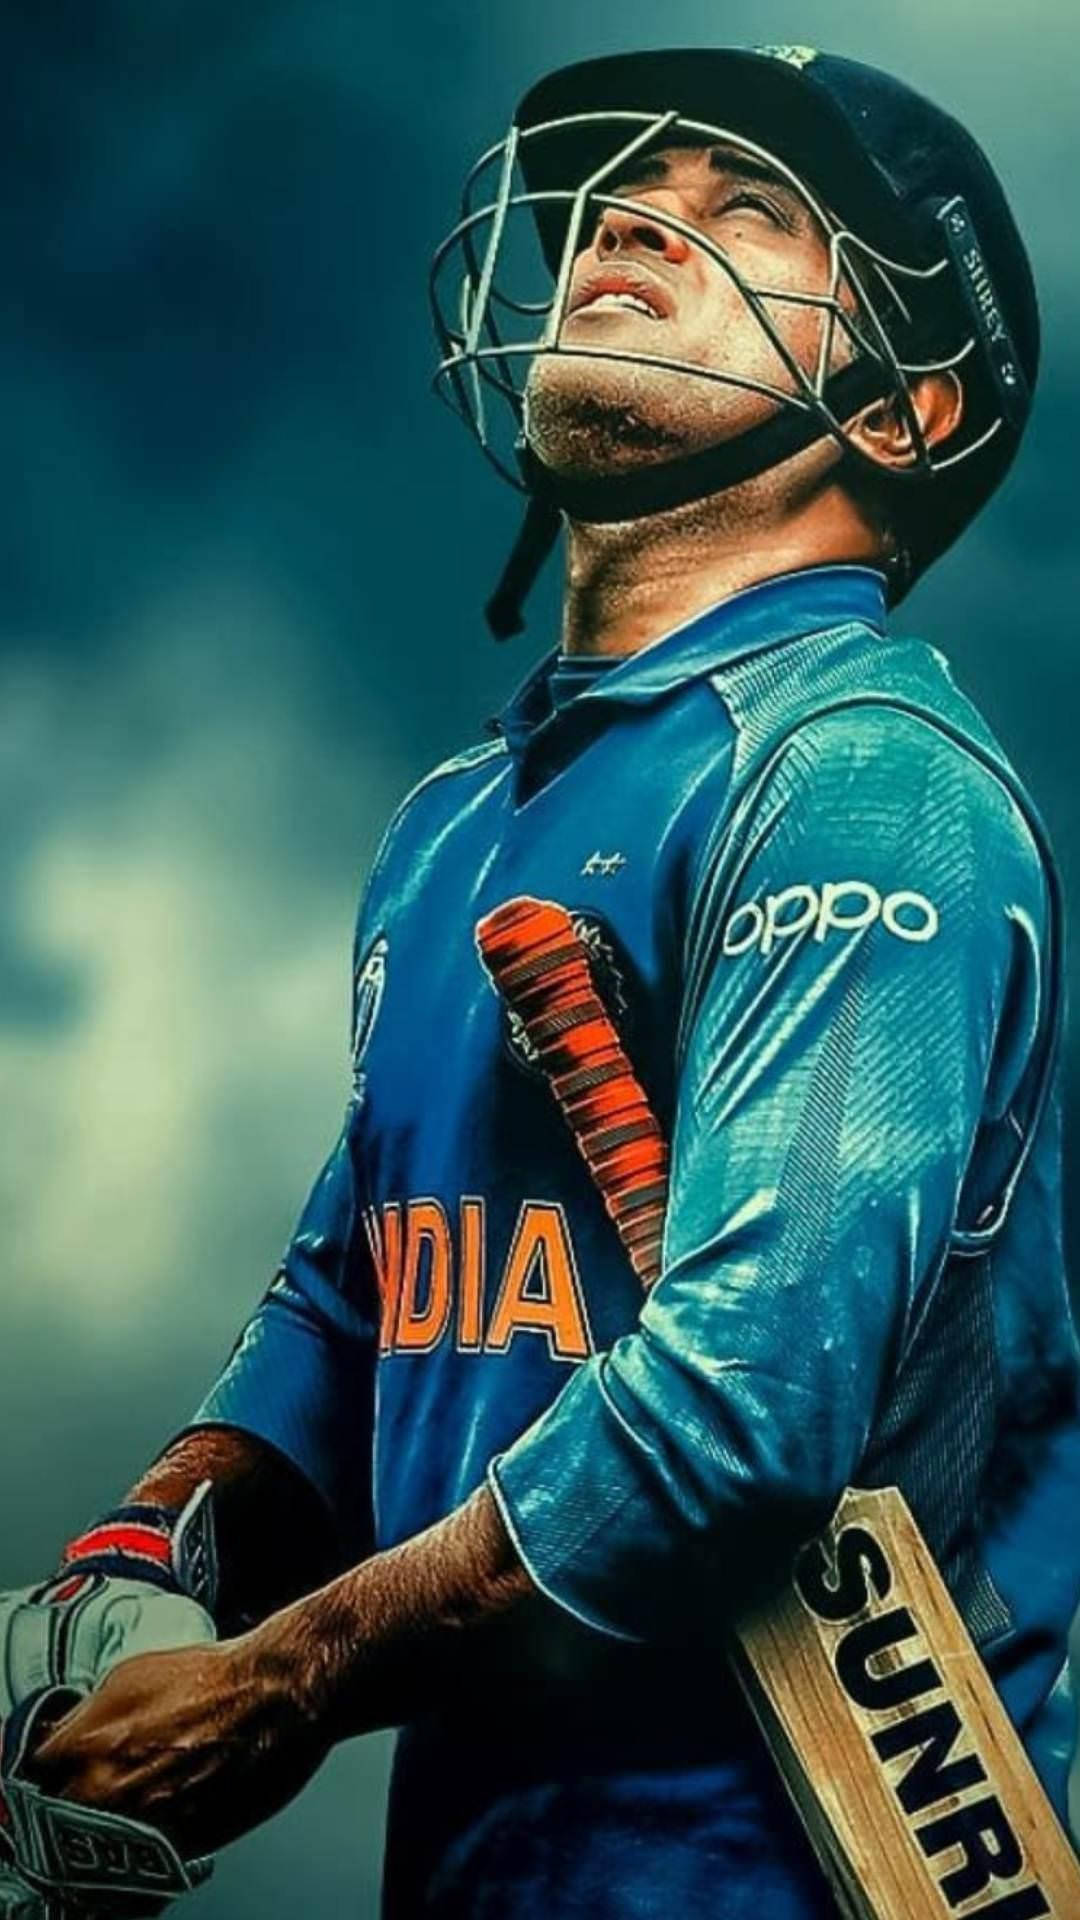 The Legendary Indian Cricket Player, Ms Dhoni On Field